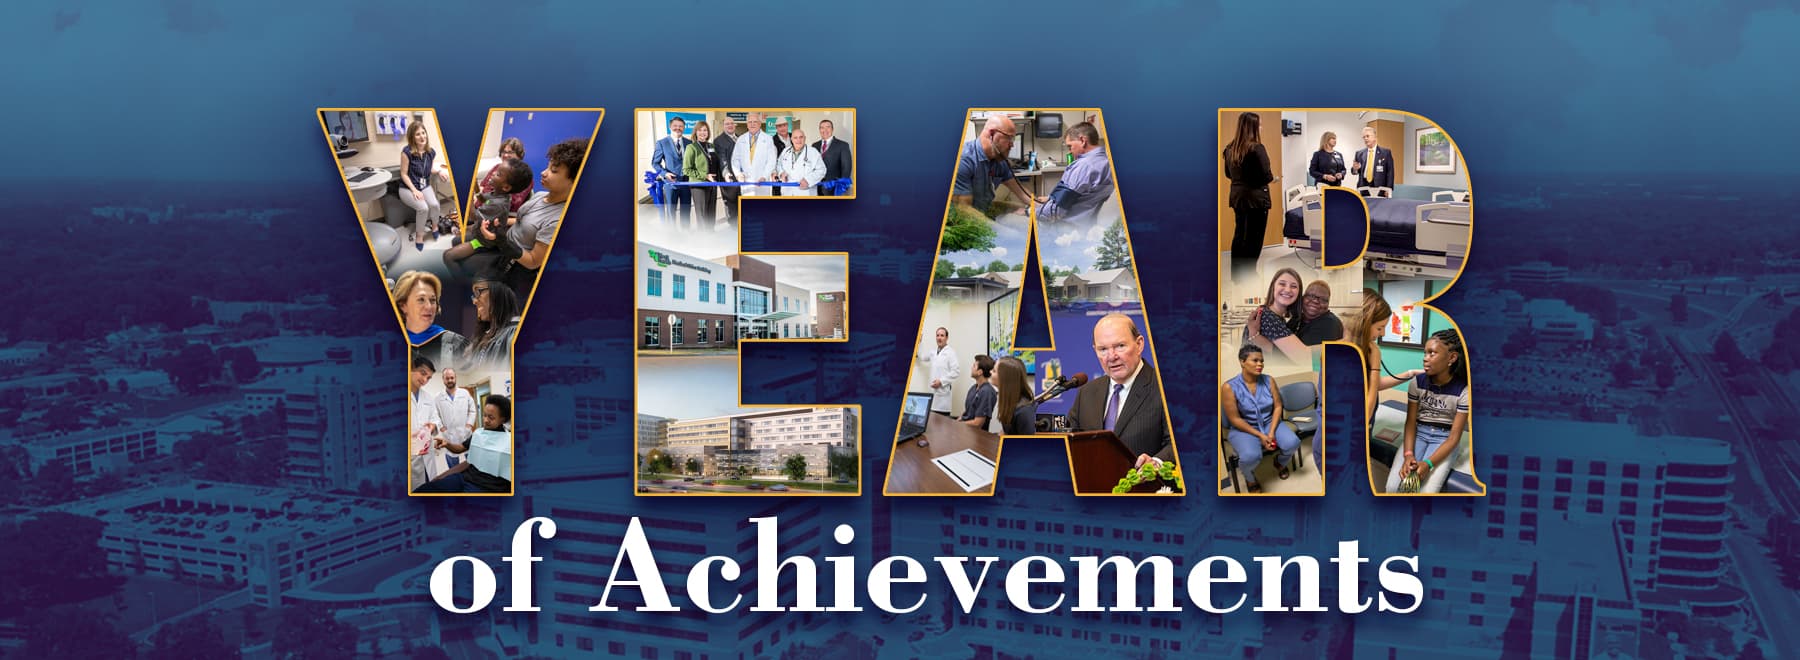 Title Year of Achievements with various UMMC news stories photo snippets within the 